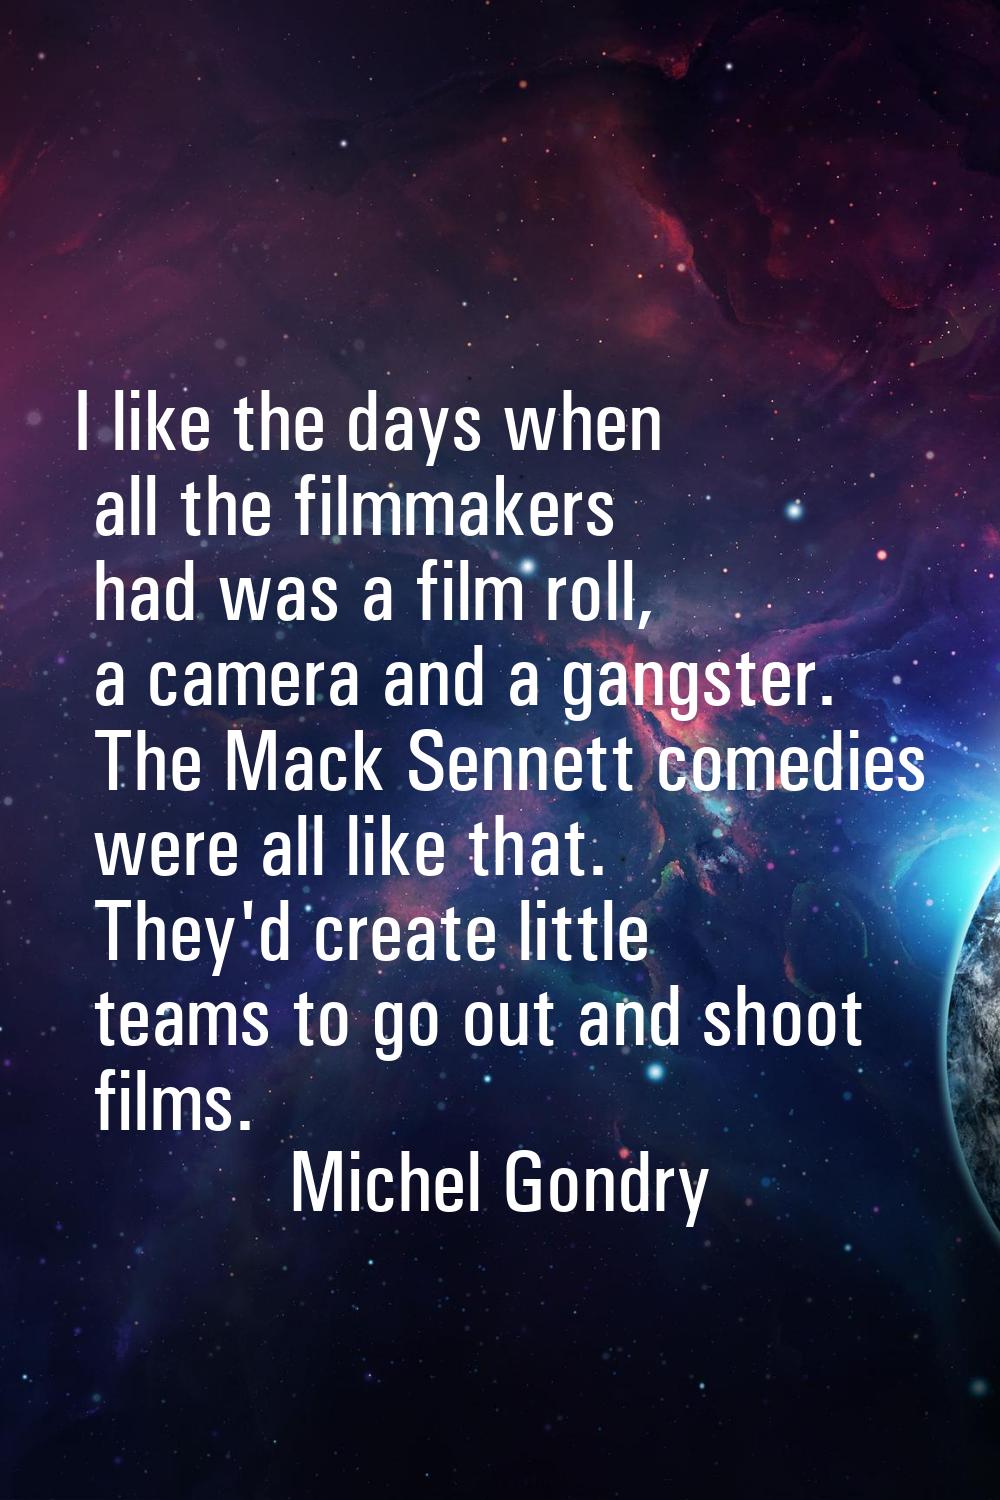 I like the days when all the filmmakers had was a film roll, a camera and a gangster. The Mack Senn